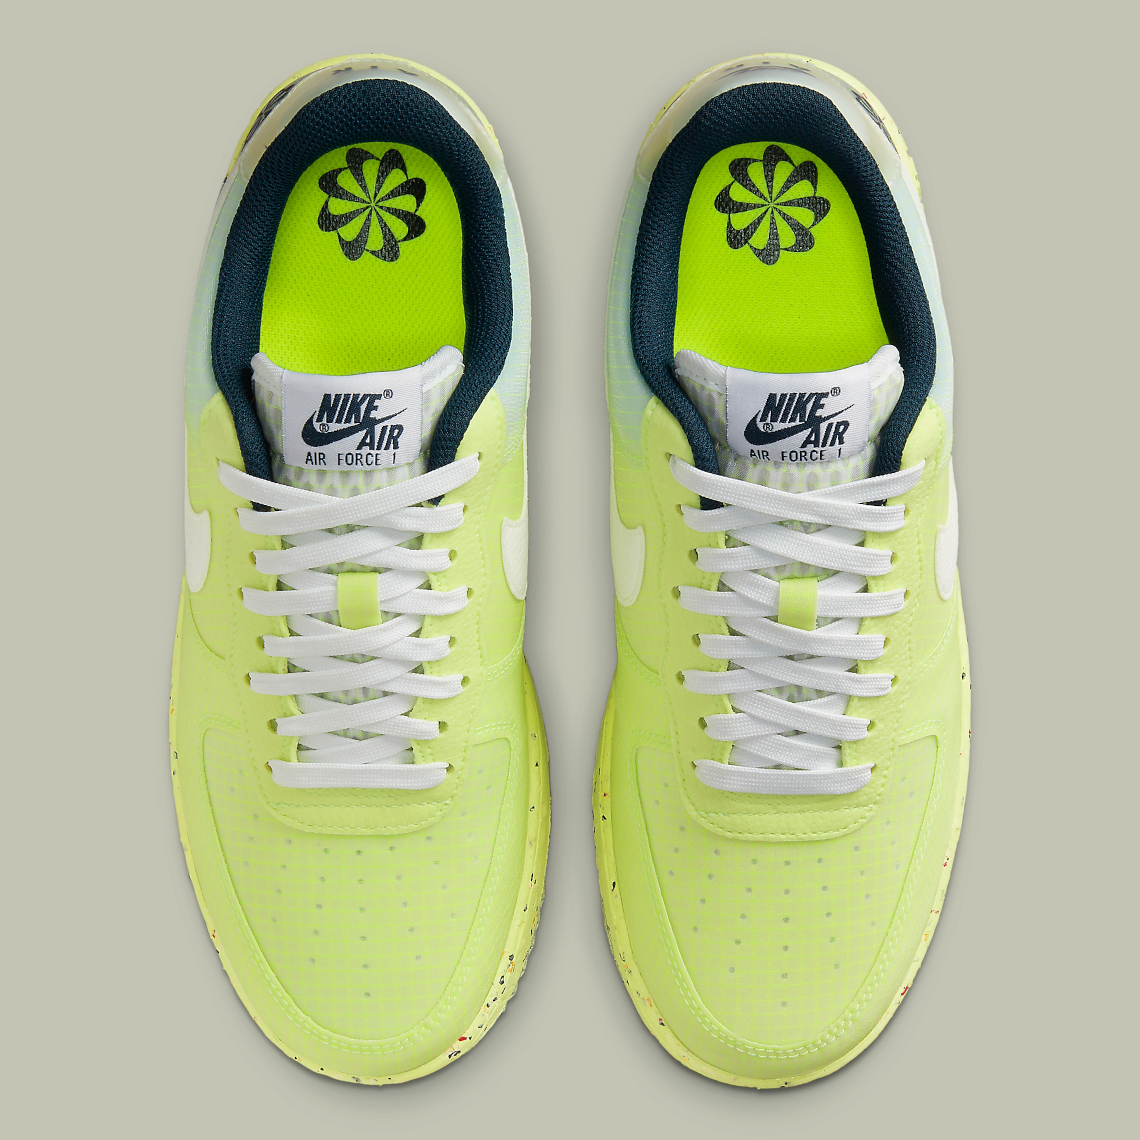 Sustainable Nike Air Force 1 Low Volt DH2521-700 | SneakerNews.com